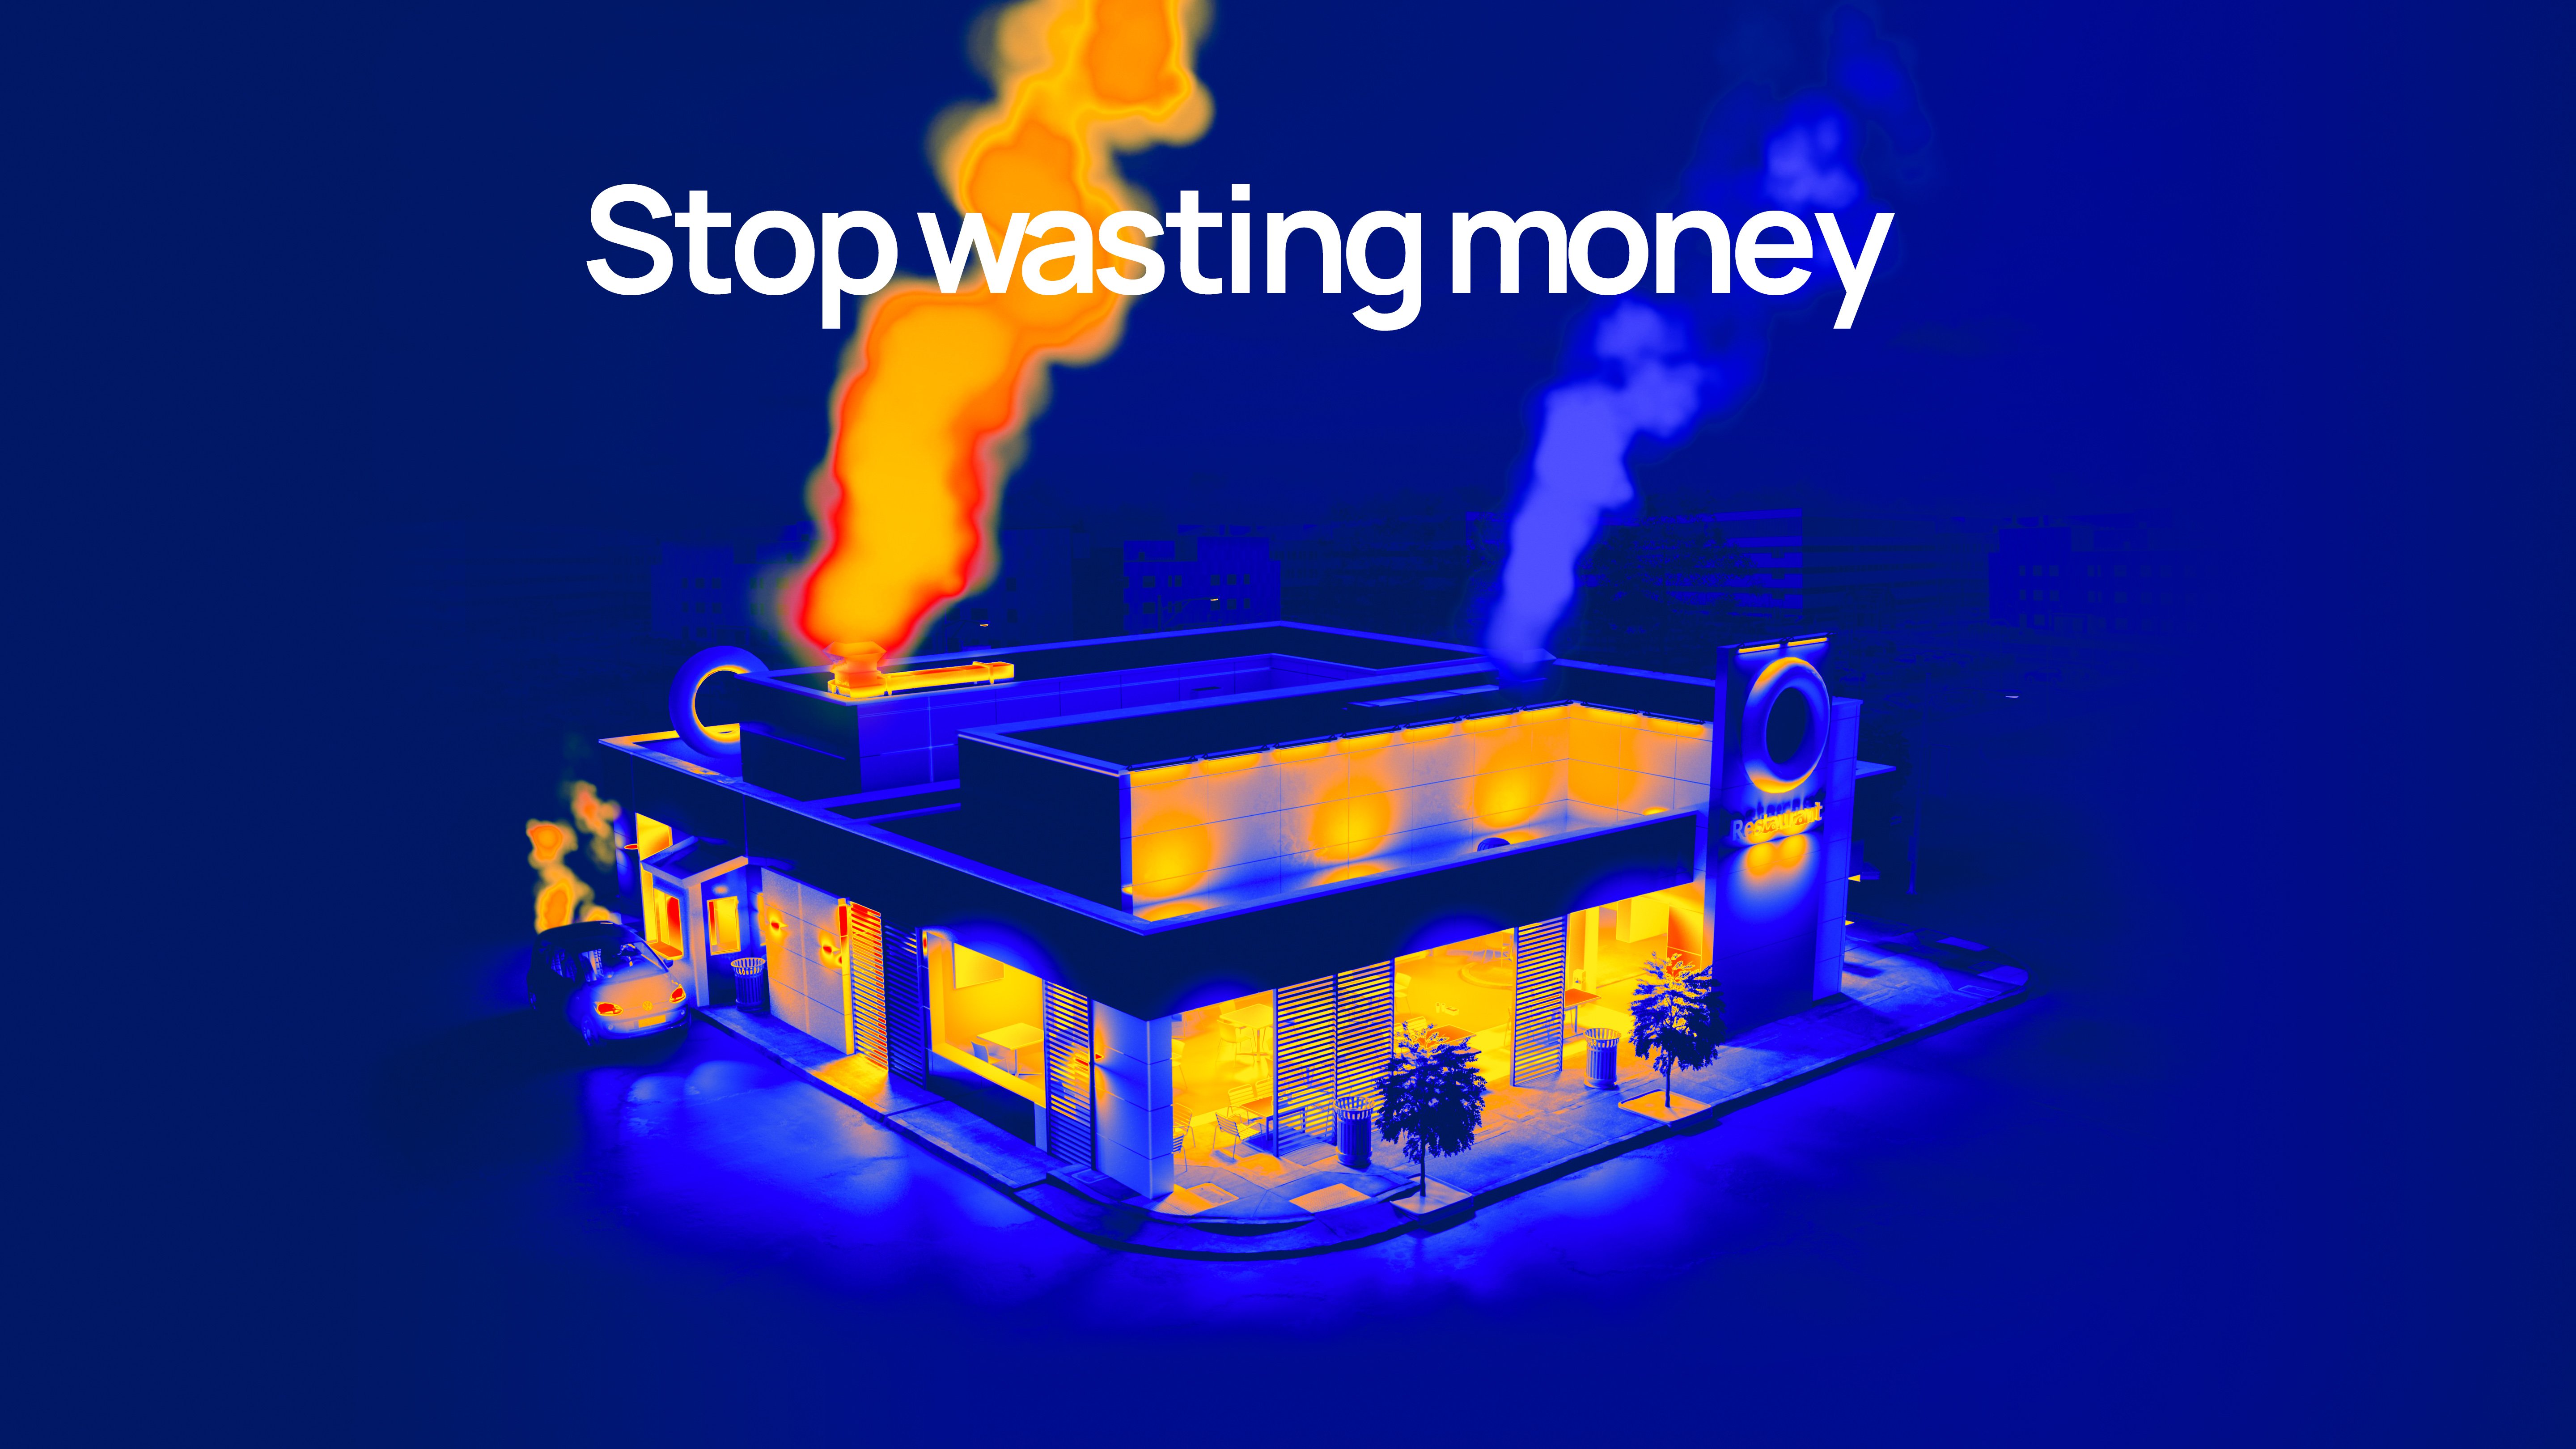 Stop_wasting-money